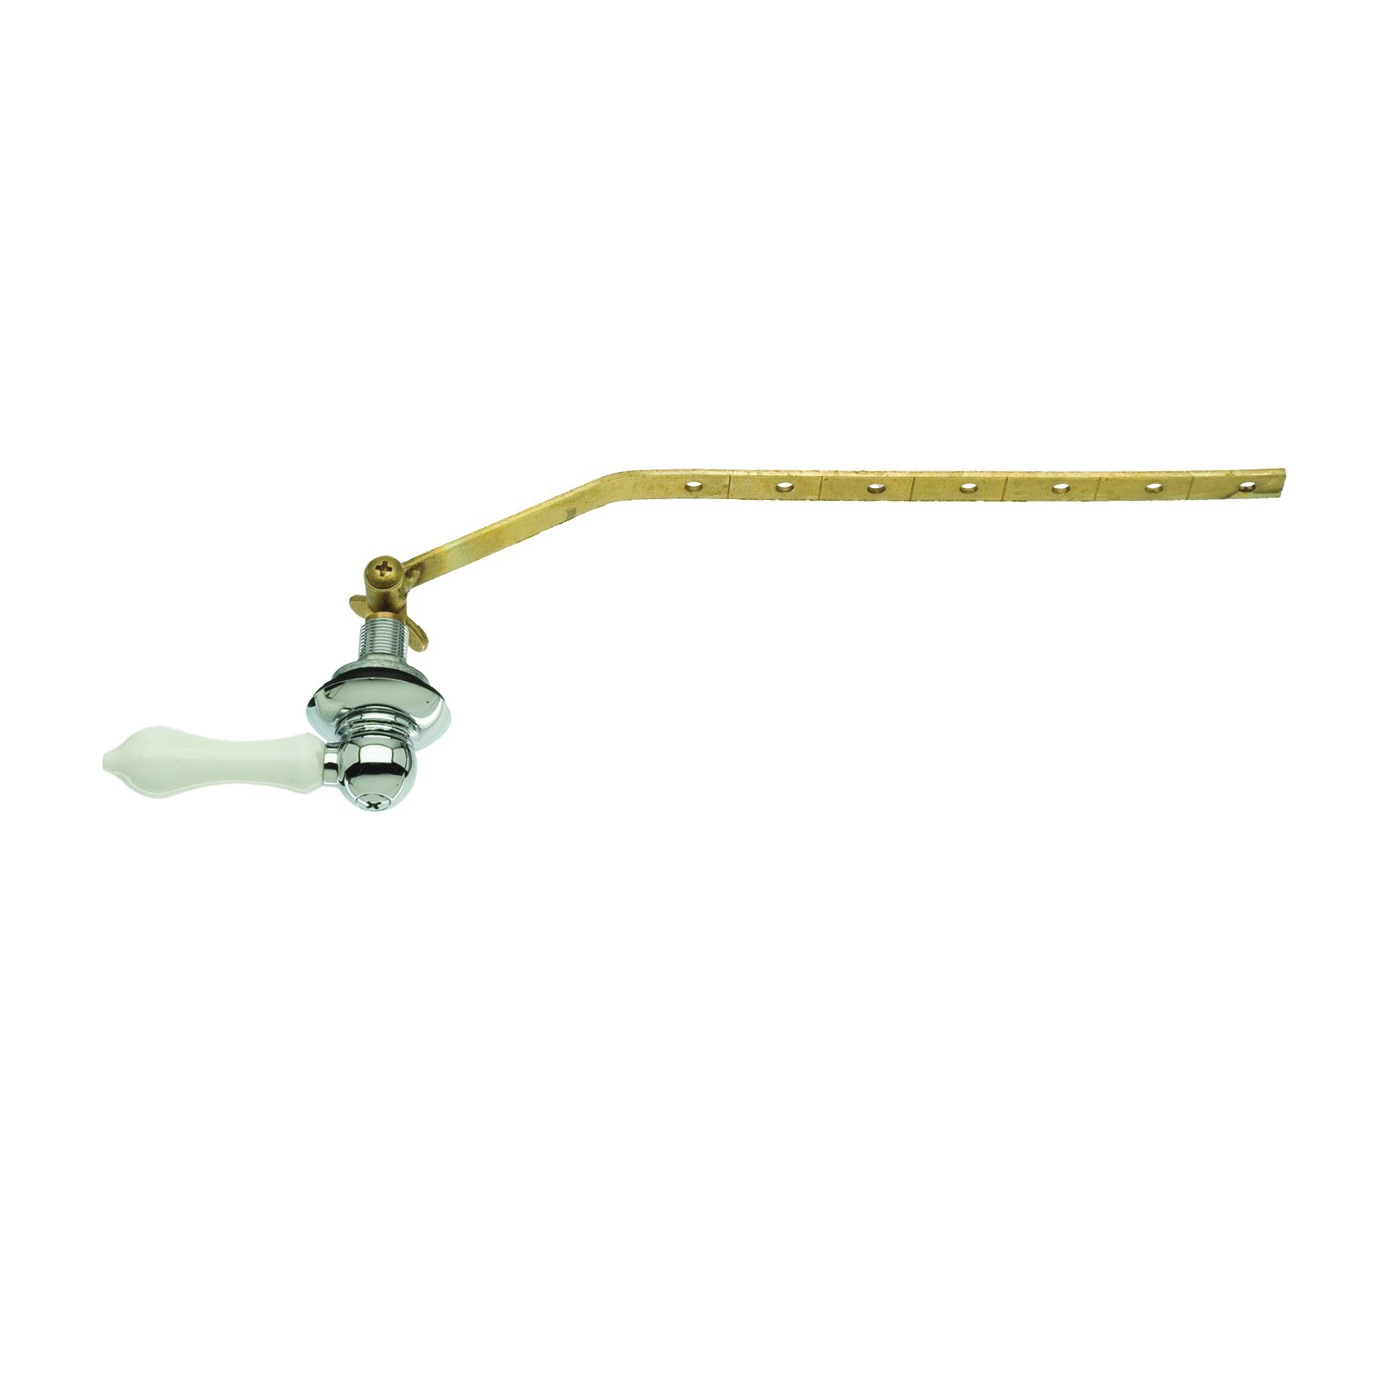 89448A Wallplate Toilet Handle, Brass, For: Angled, Front or Side-Mount Toilet Tank